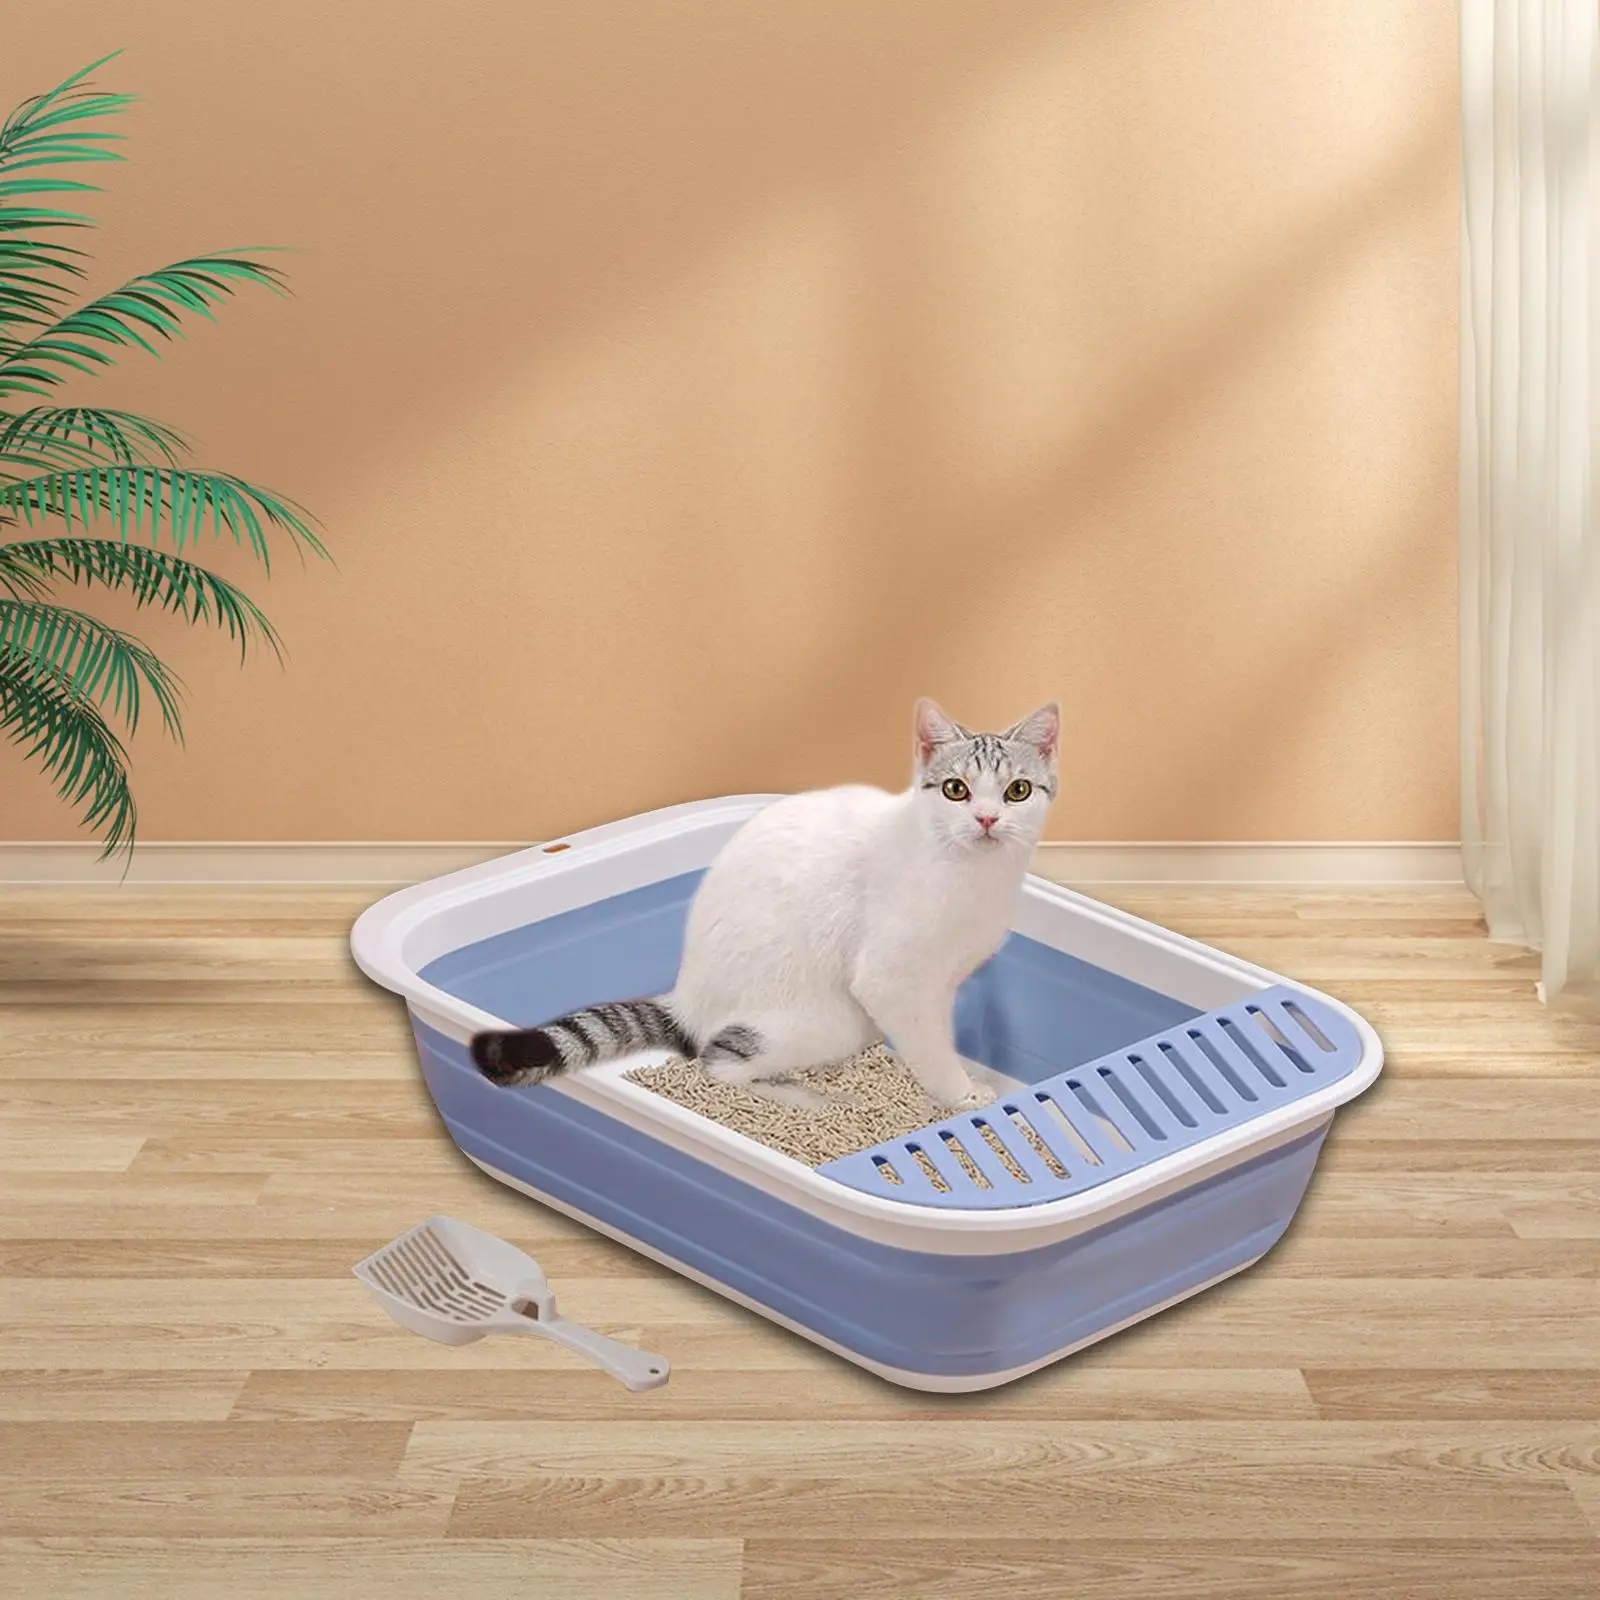 Cat Litter Box Collapsible Bedpan Splashproof Kitty Litter Pan for All Kinds of Cat Litter Small Animals Rabbit Easy to Clean